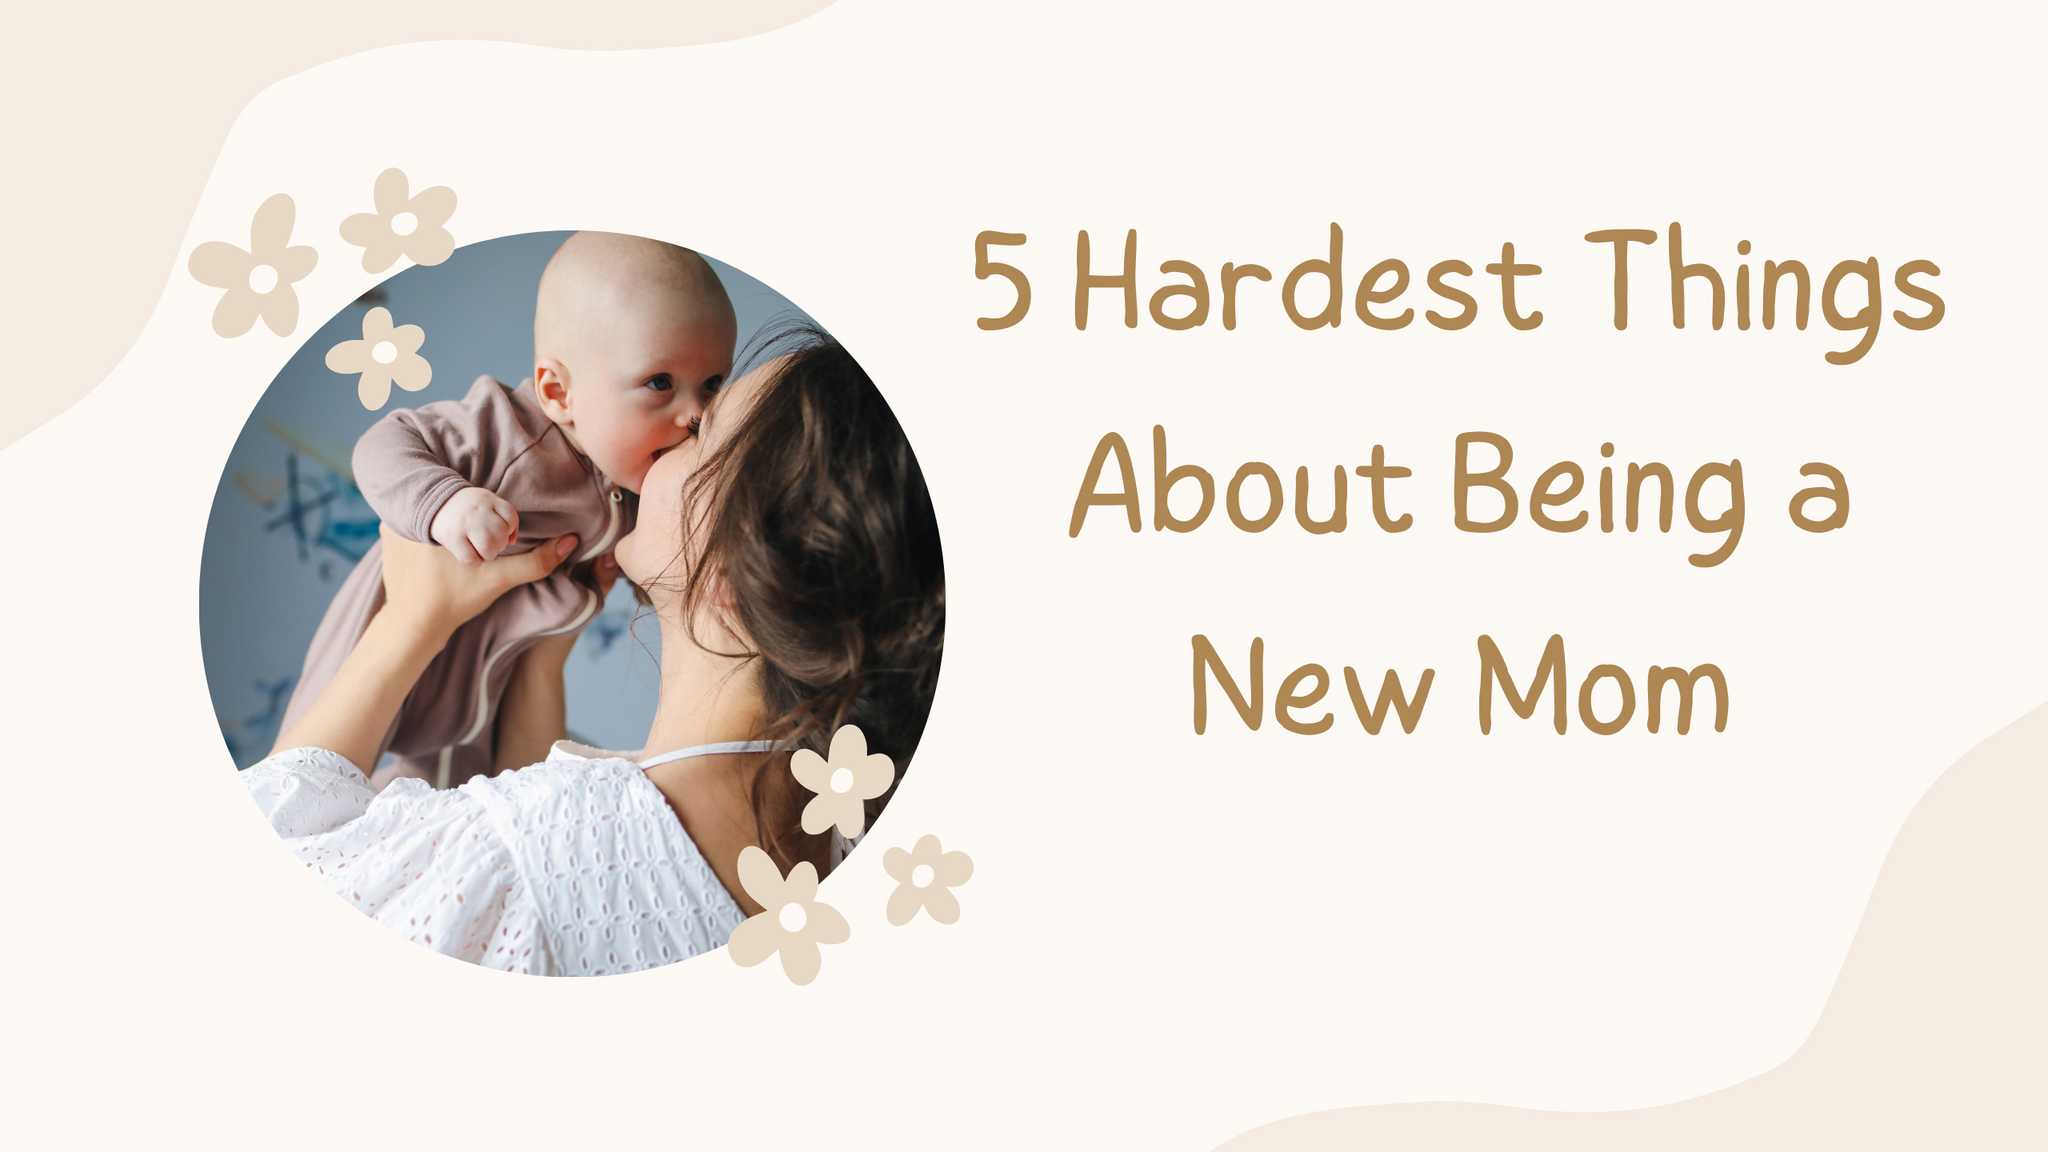 5 Hardest Things About Being a New Mom